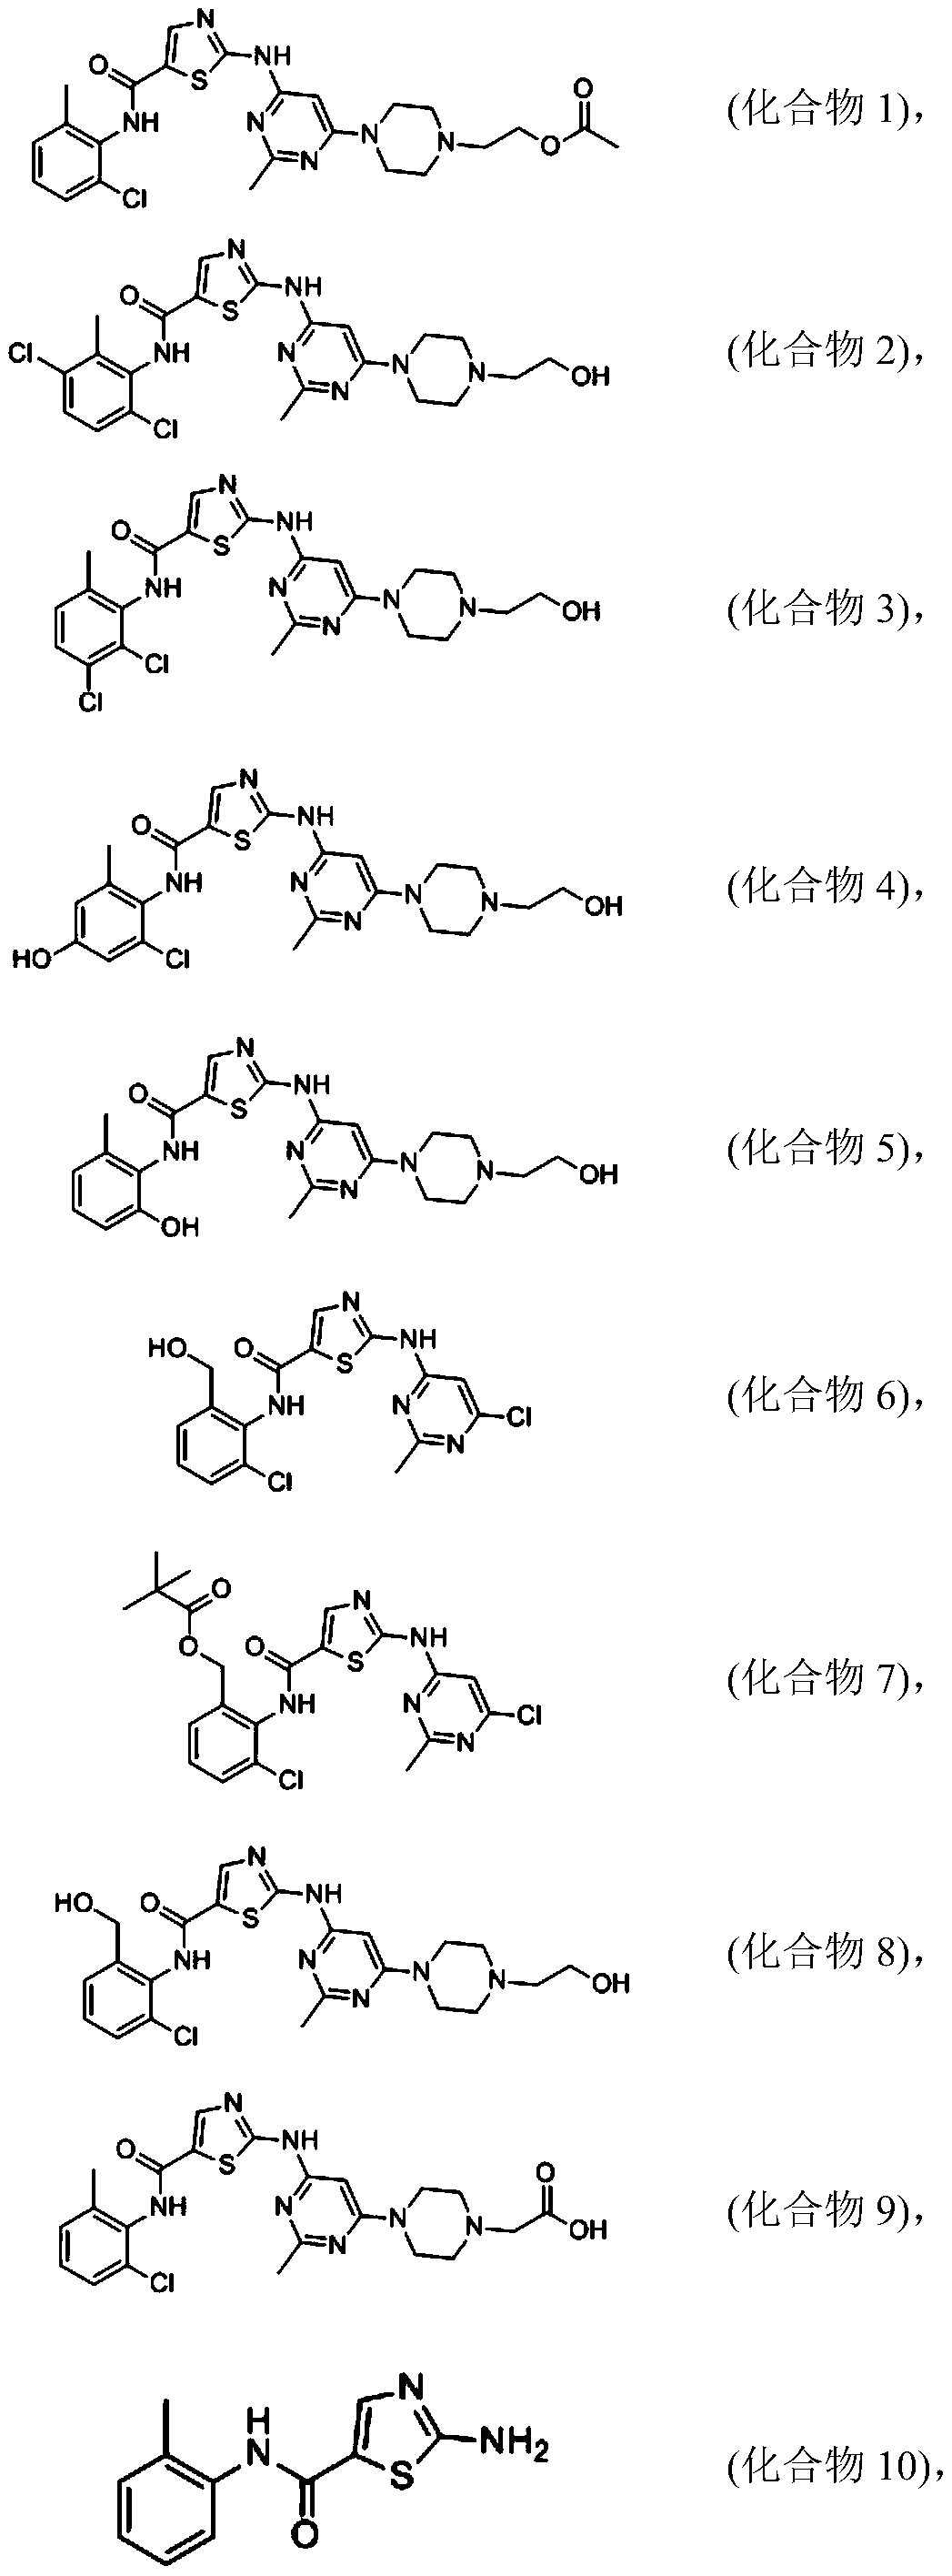 Composition containing phenyl-carbamoyl thiazole derivative mixture and application of composition